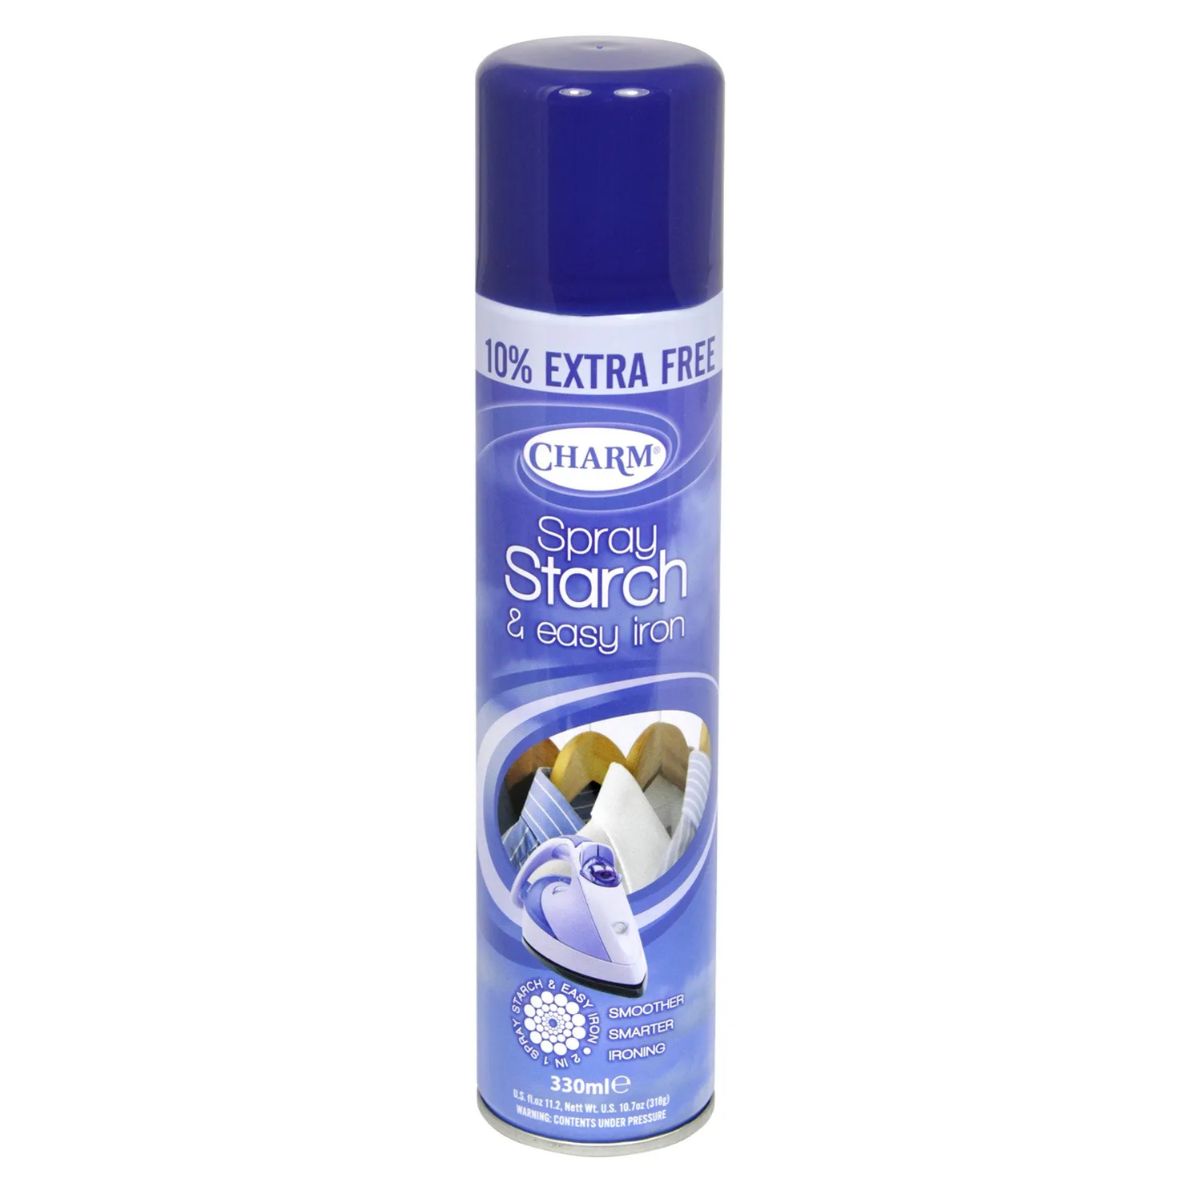 A bottle of Charm - Spray Starch & Easy Iron - 330ml on a white background.